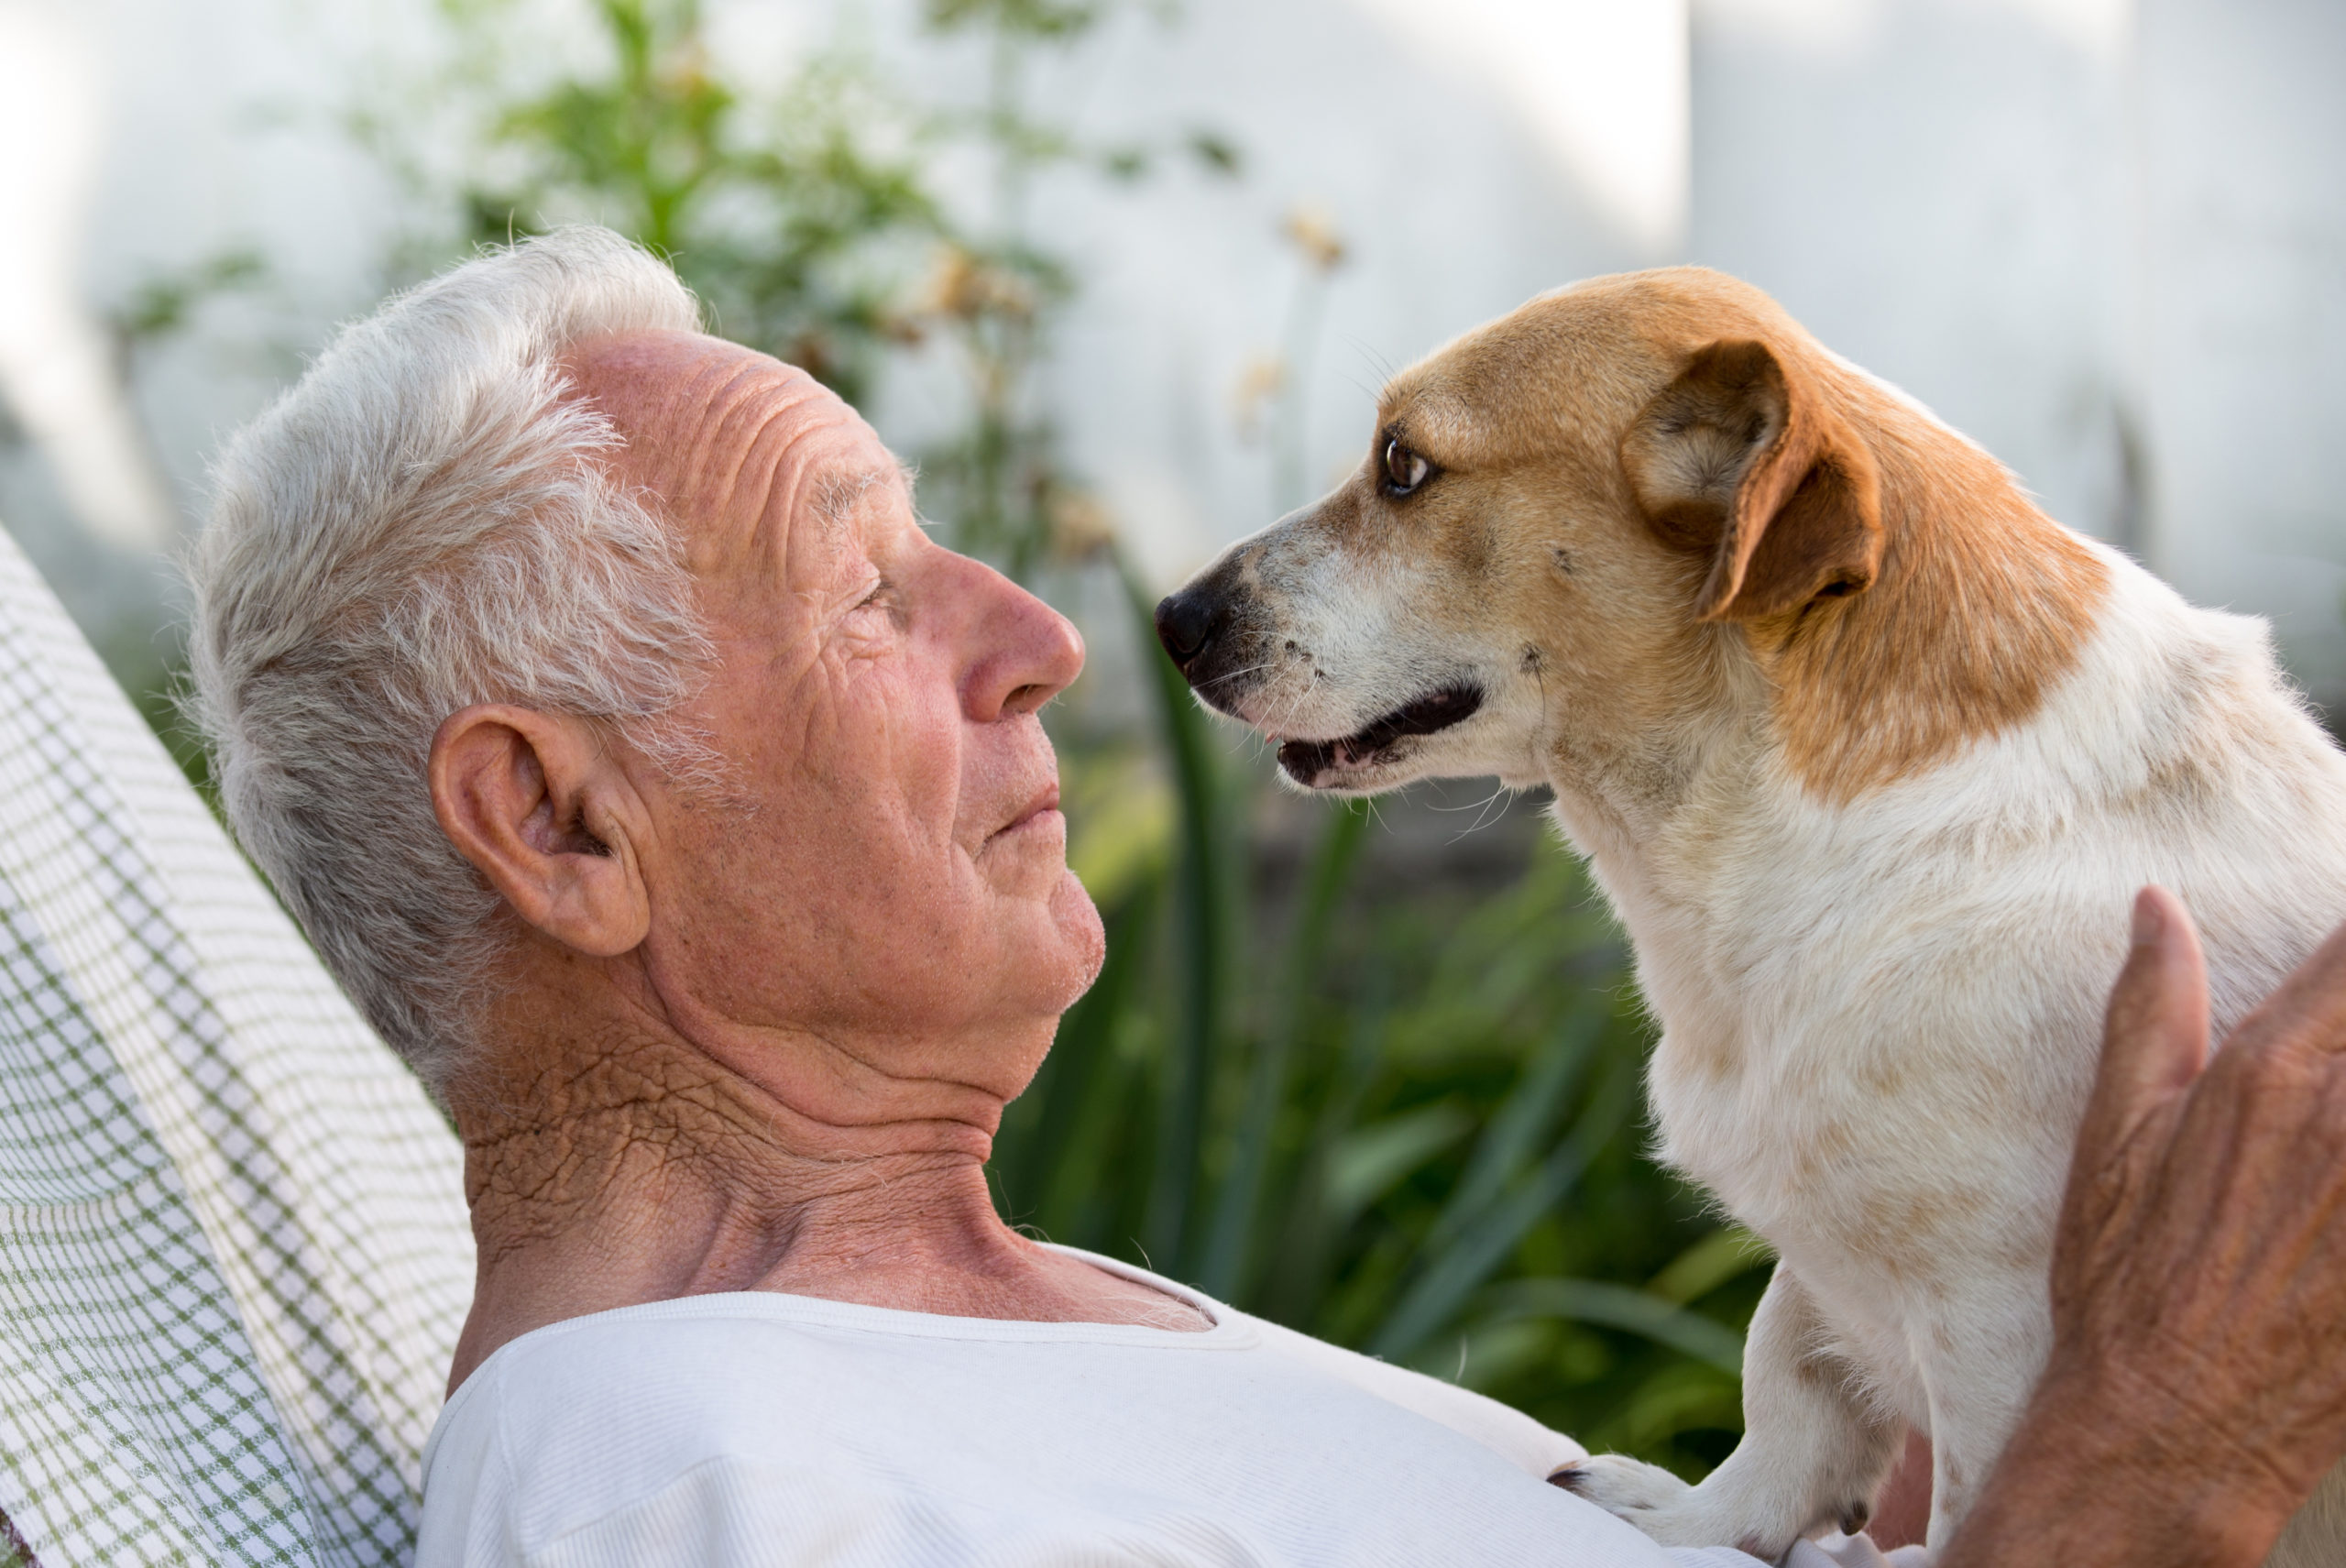 7 Ways Pets Can Help with Healthy Aging - The Zebra